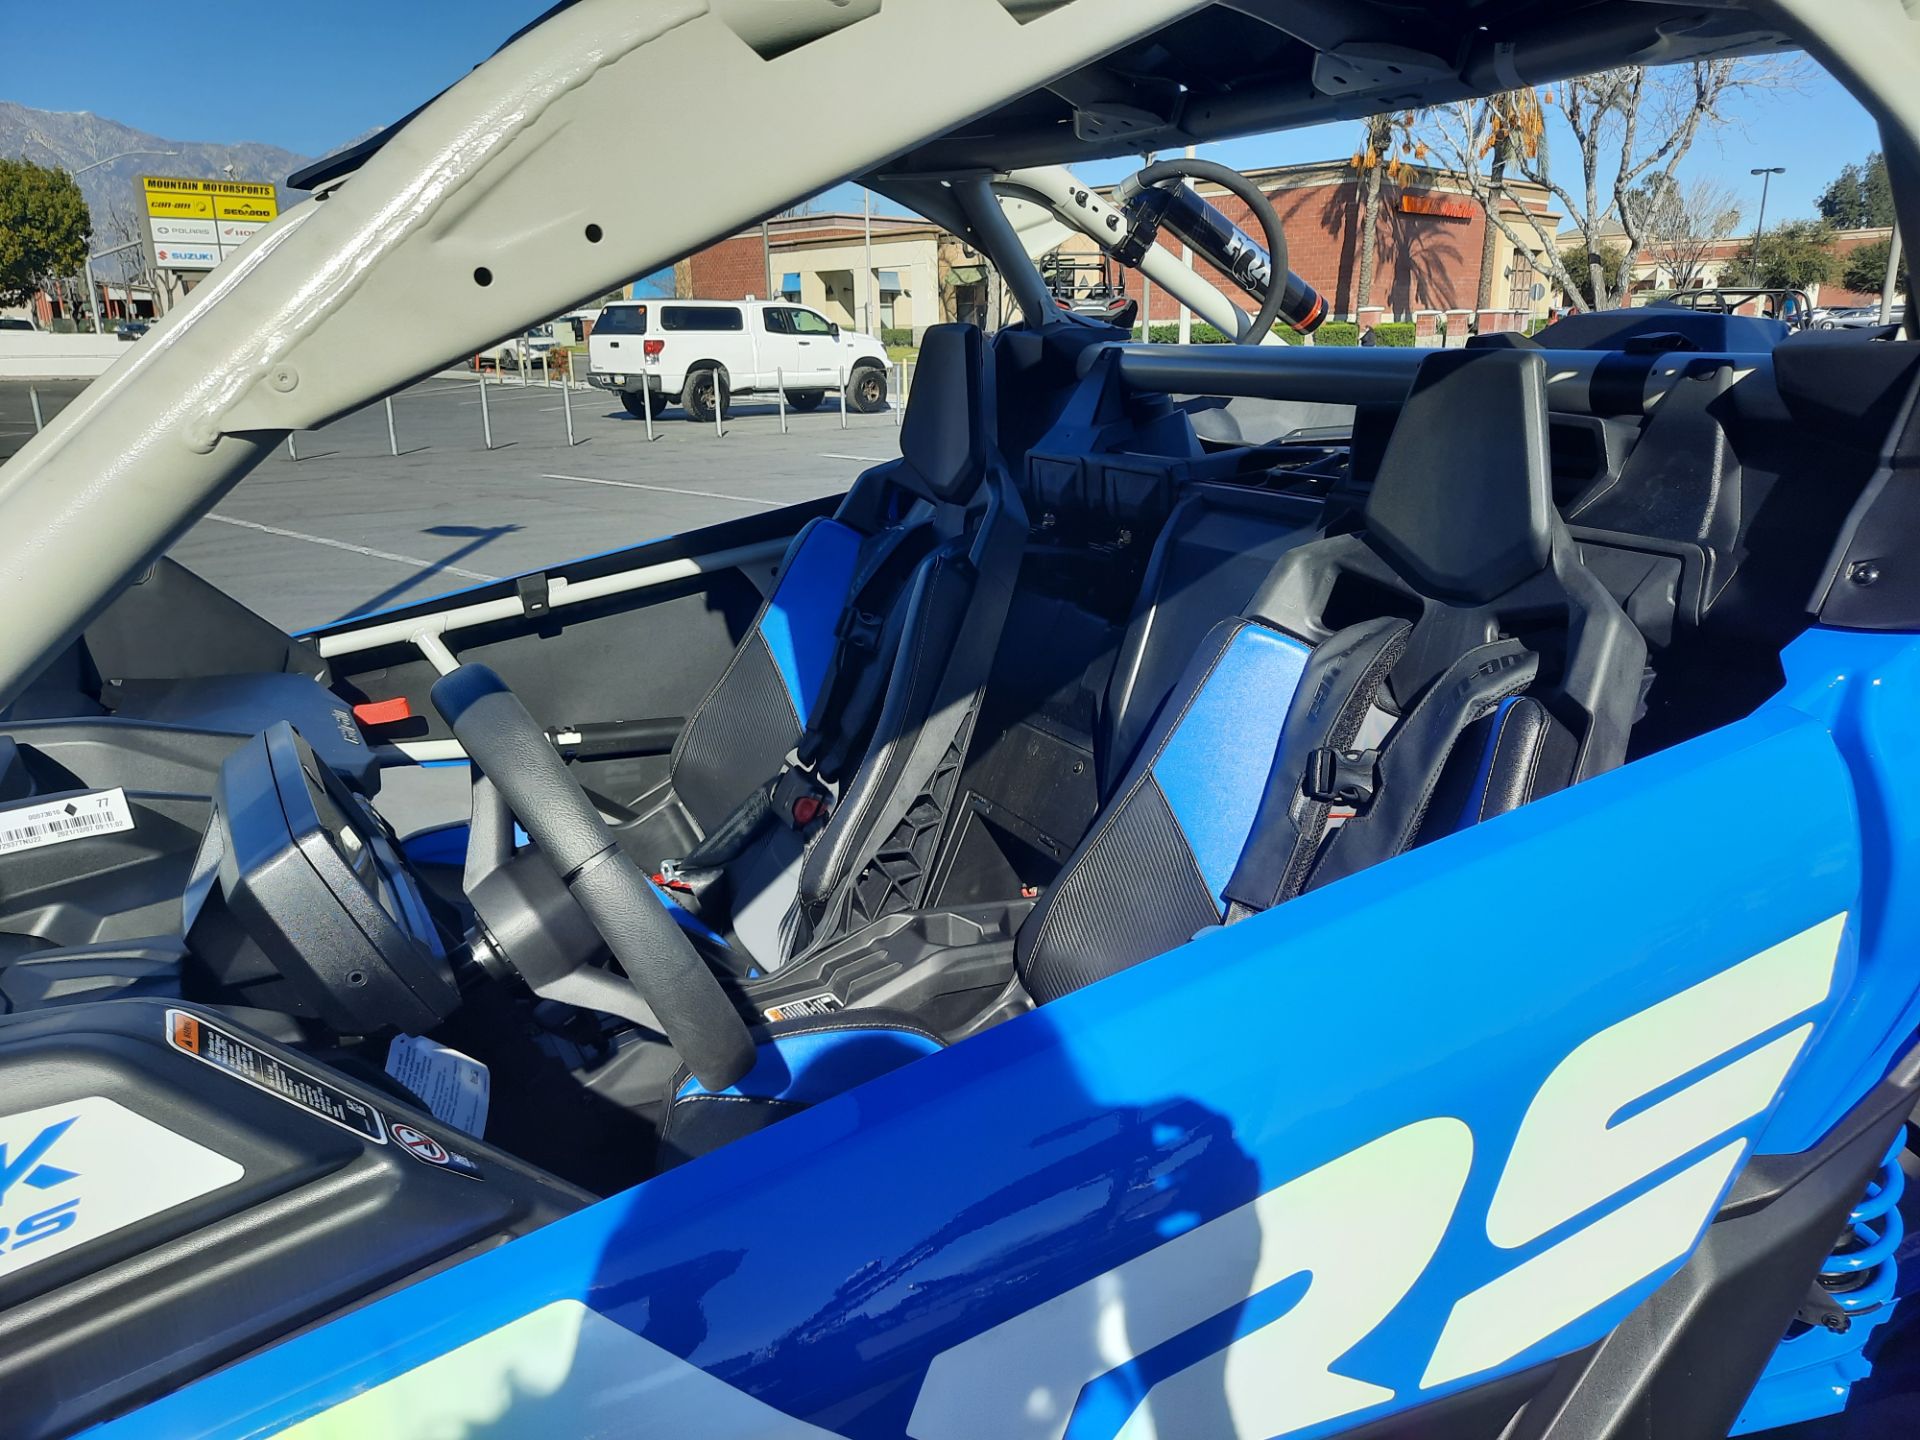 2022 Can-Am Maverick X3 X RS Turbo RR with Smart-Shox in Ontario, California - Photo 33